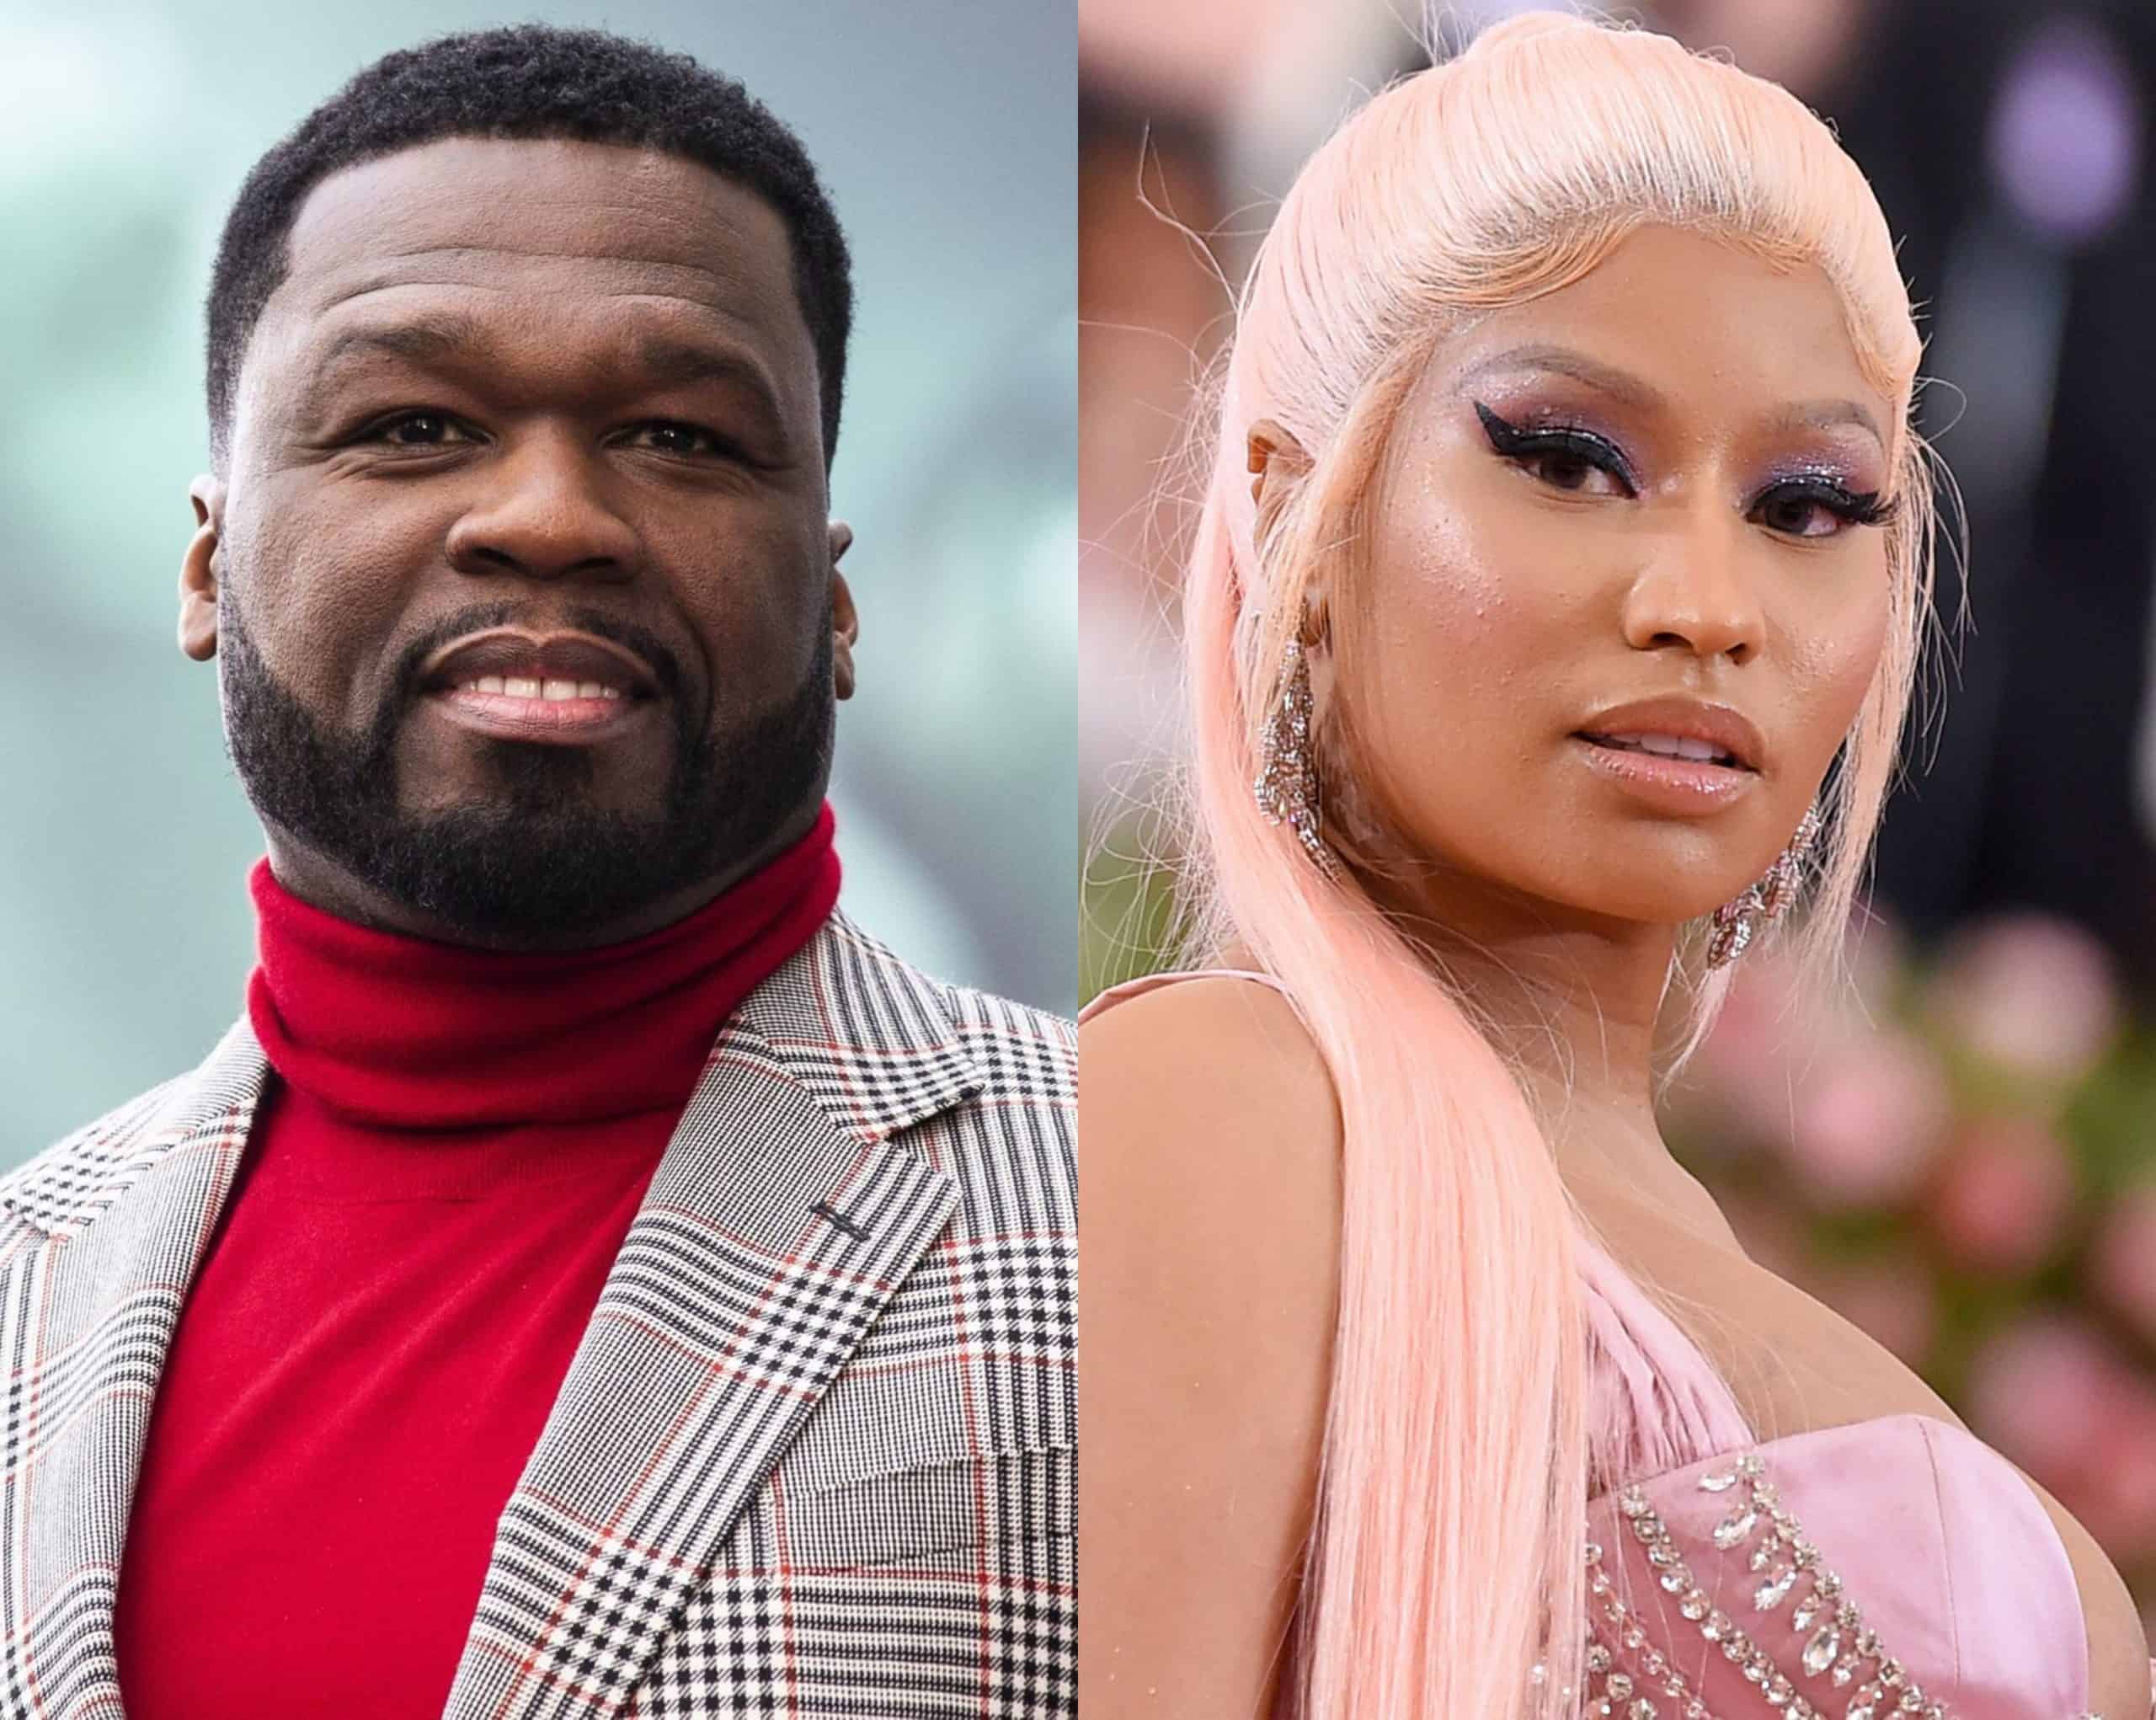 50 Cent Would Love To Star In A Romantic Comedy with Nicki Minaj